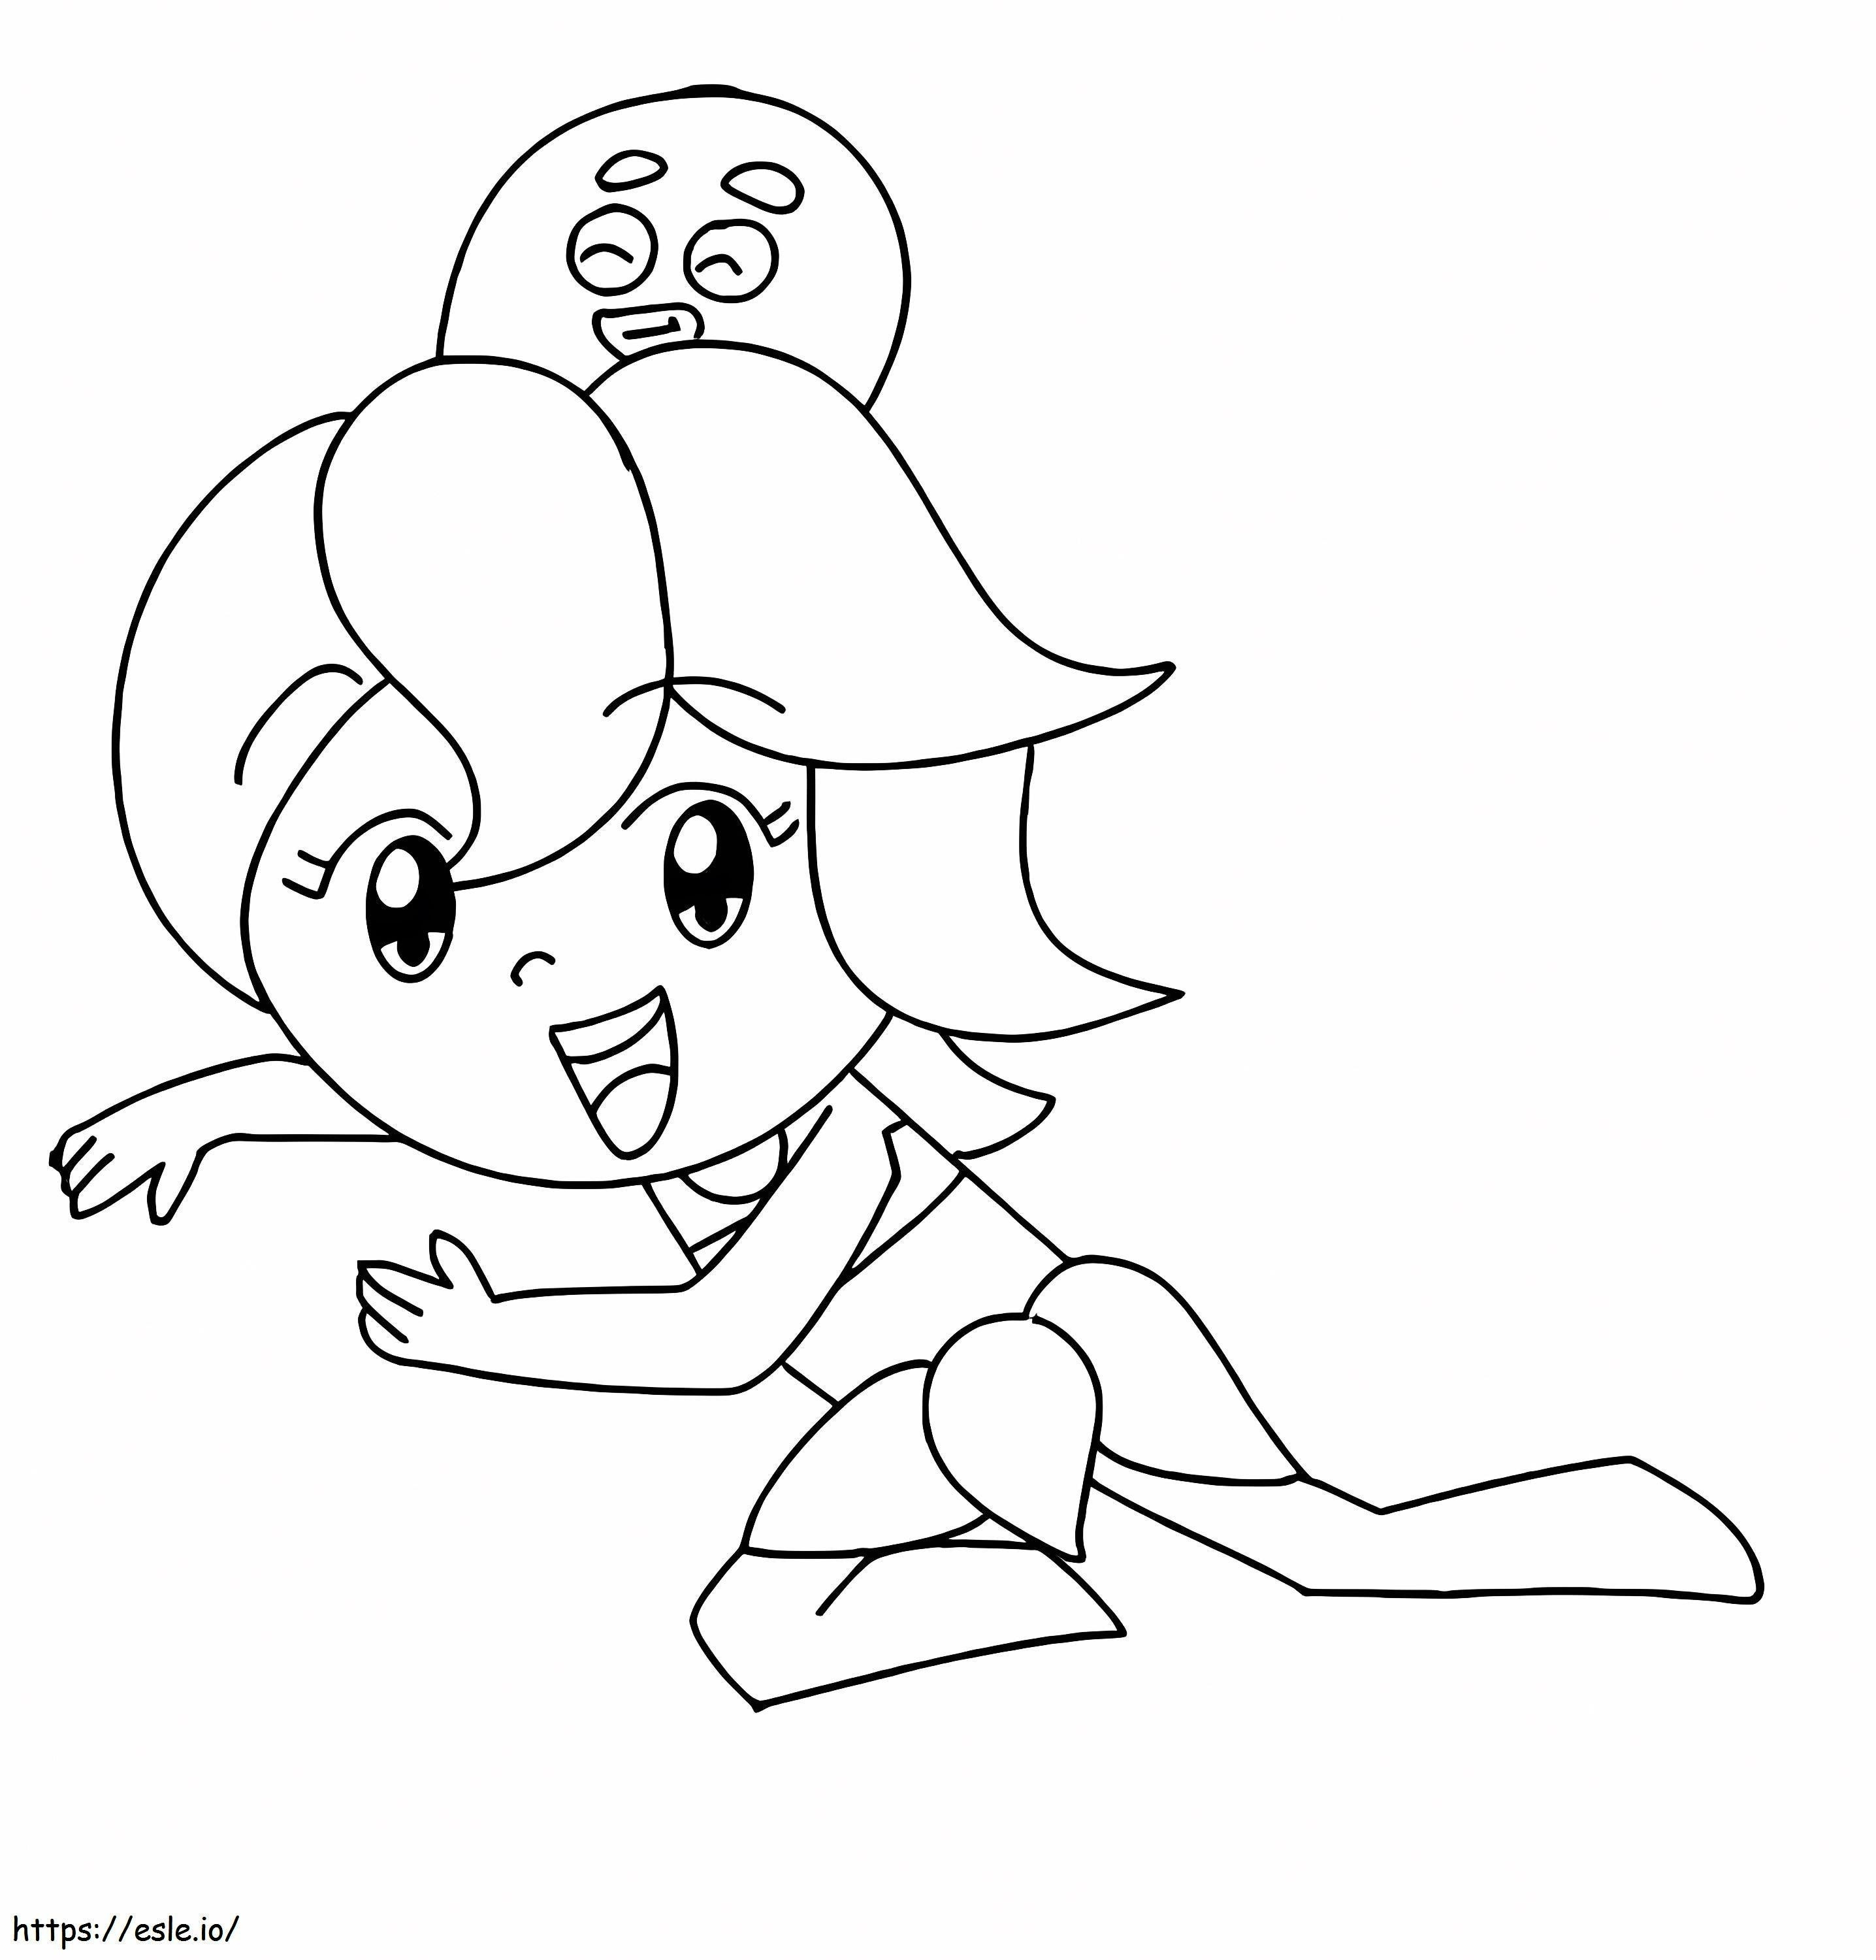 Polvina Smiling coloring page